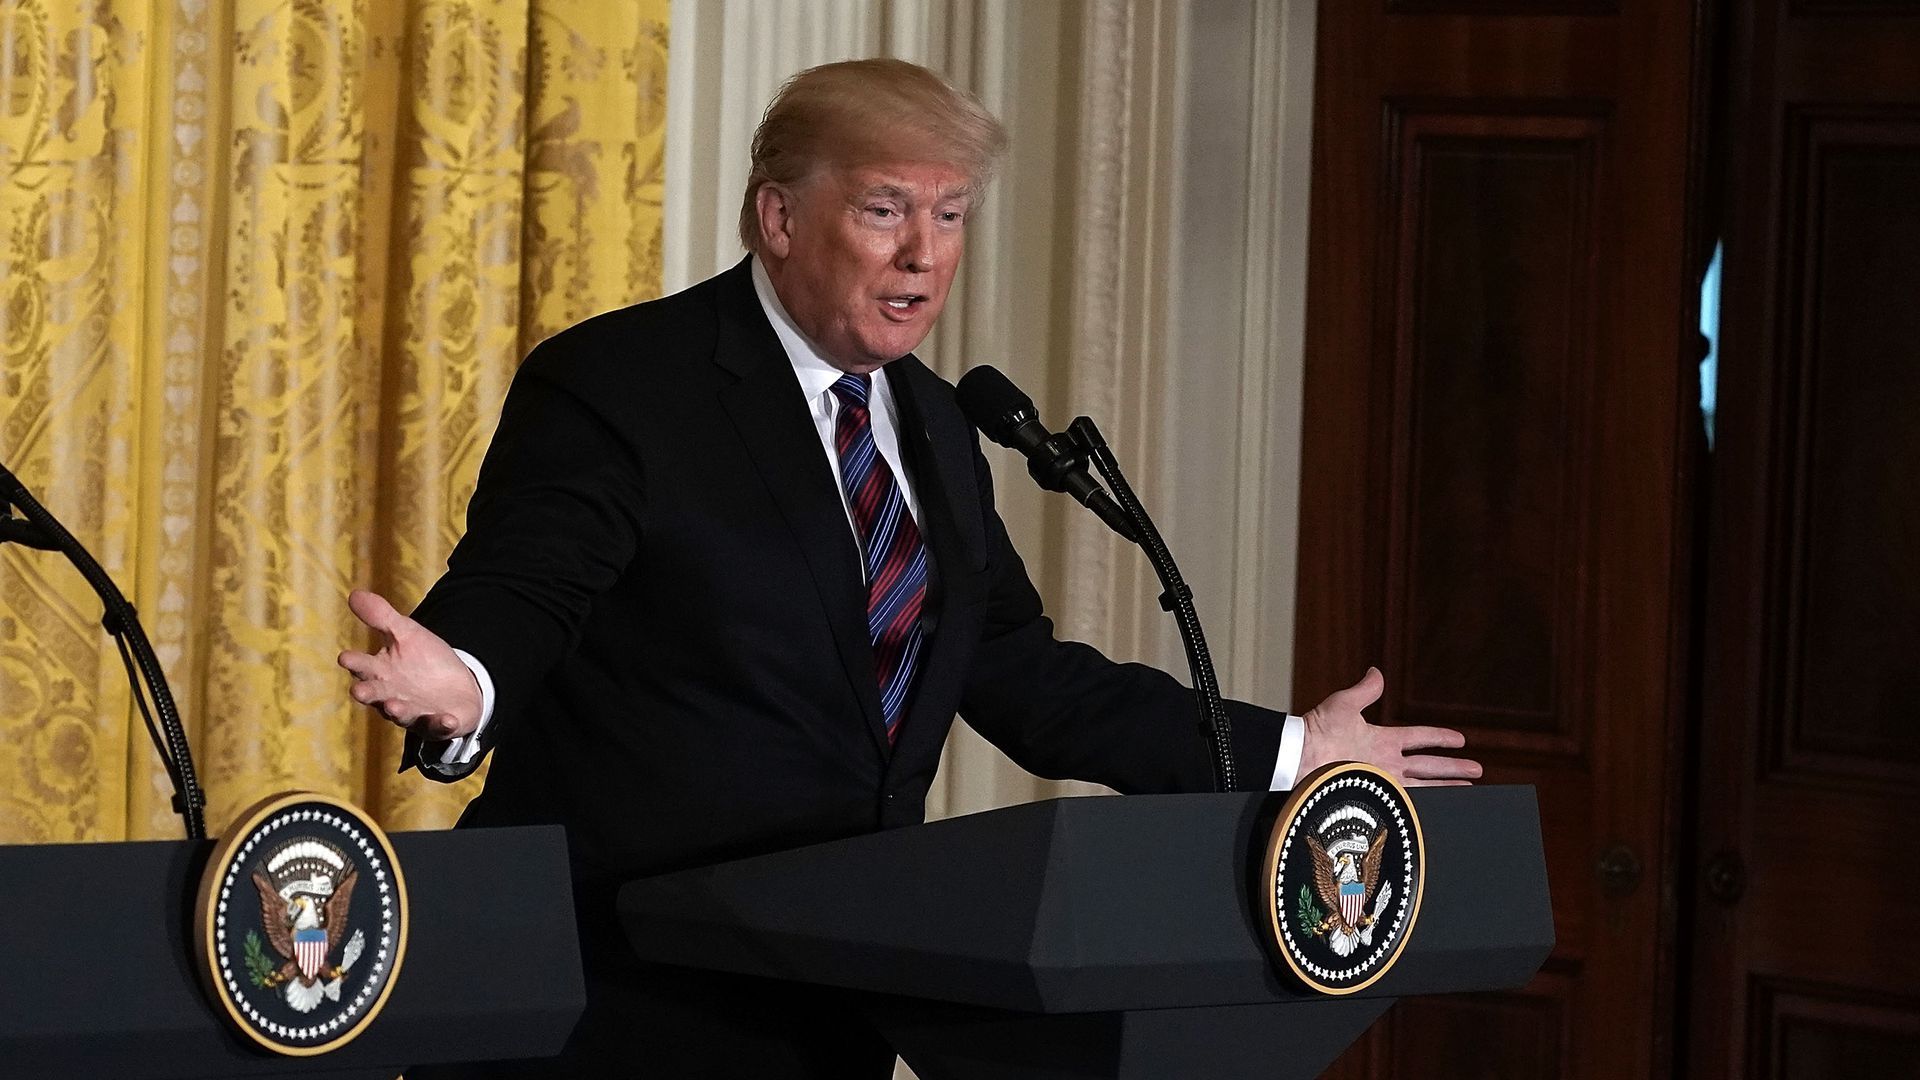 President Trump gestures while behind the podium at a press conference